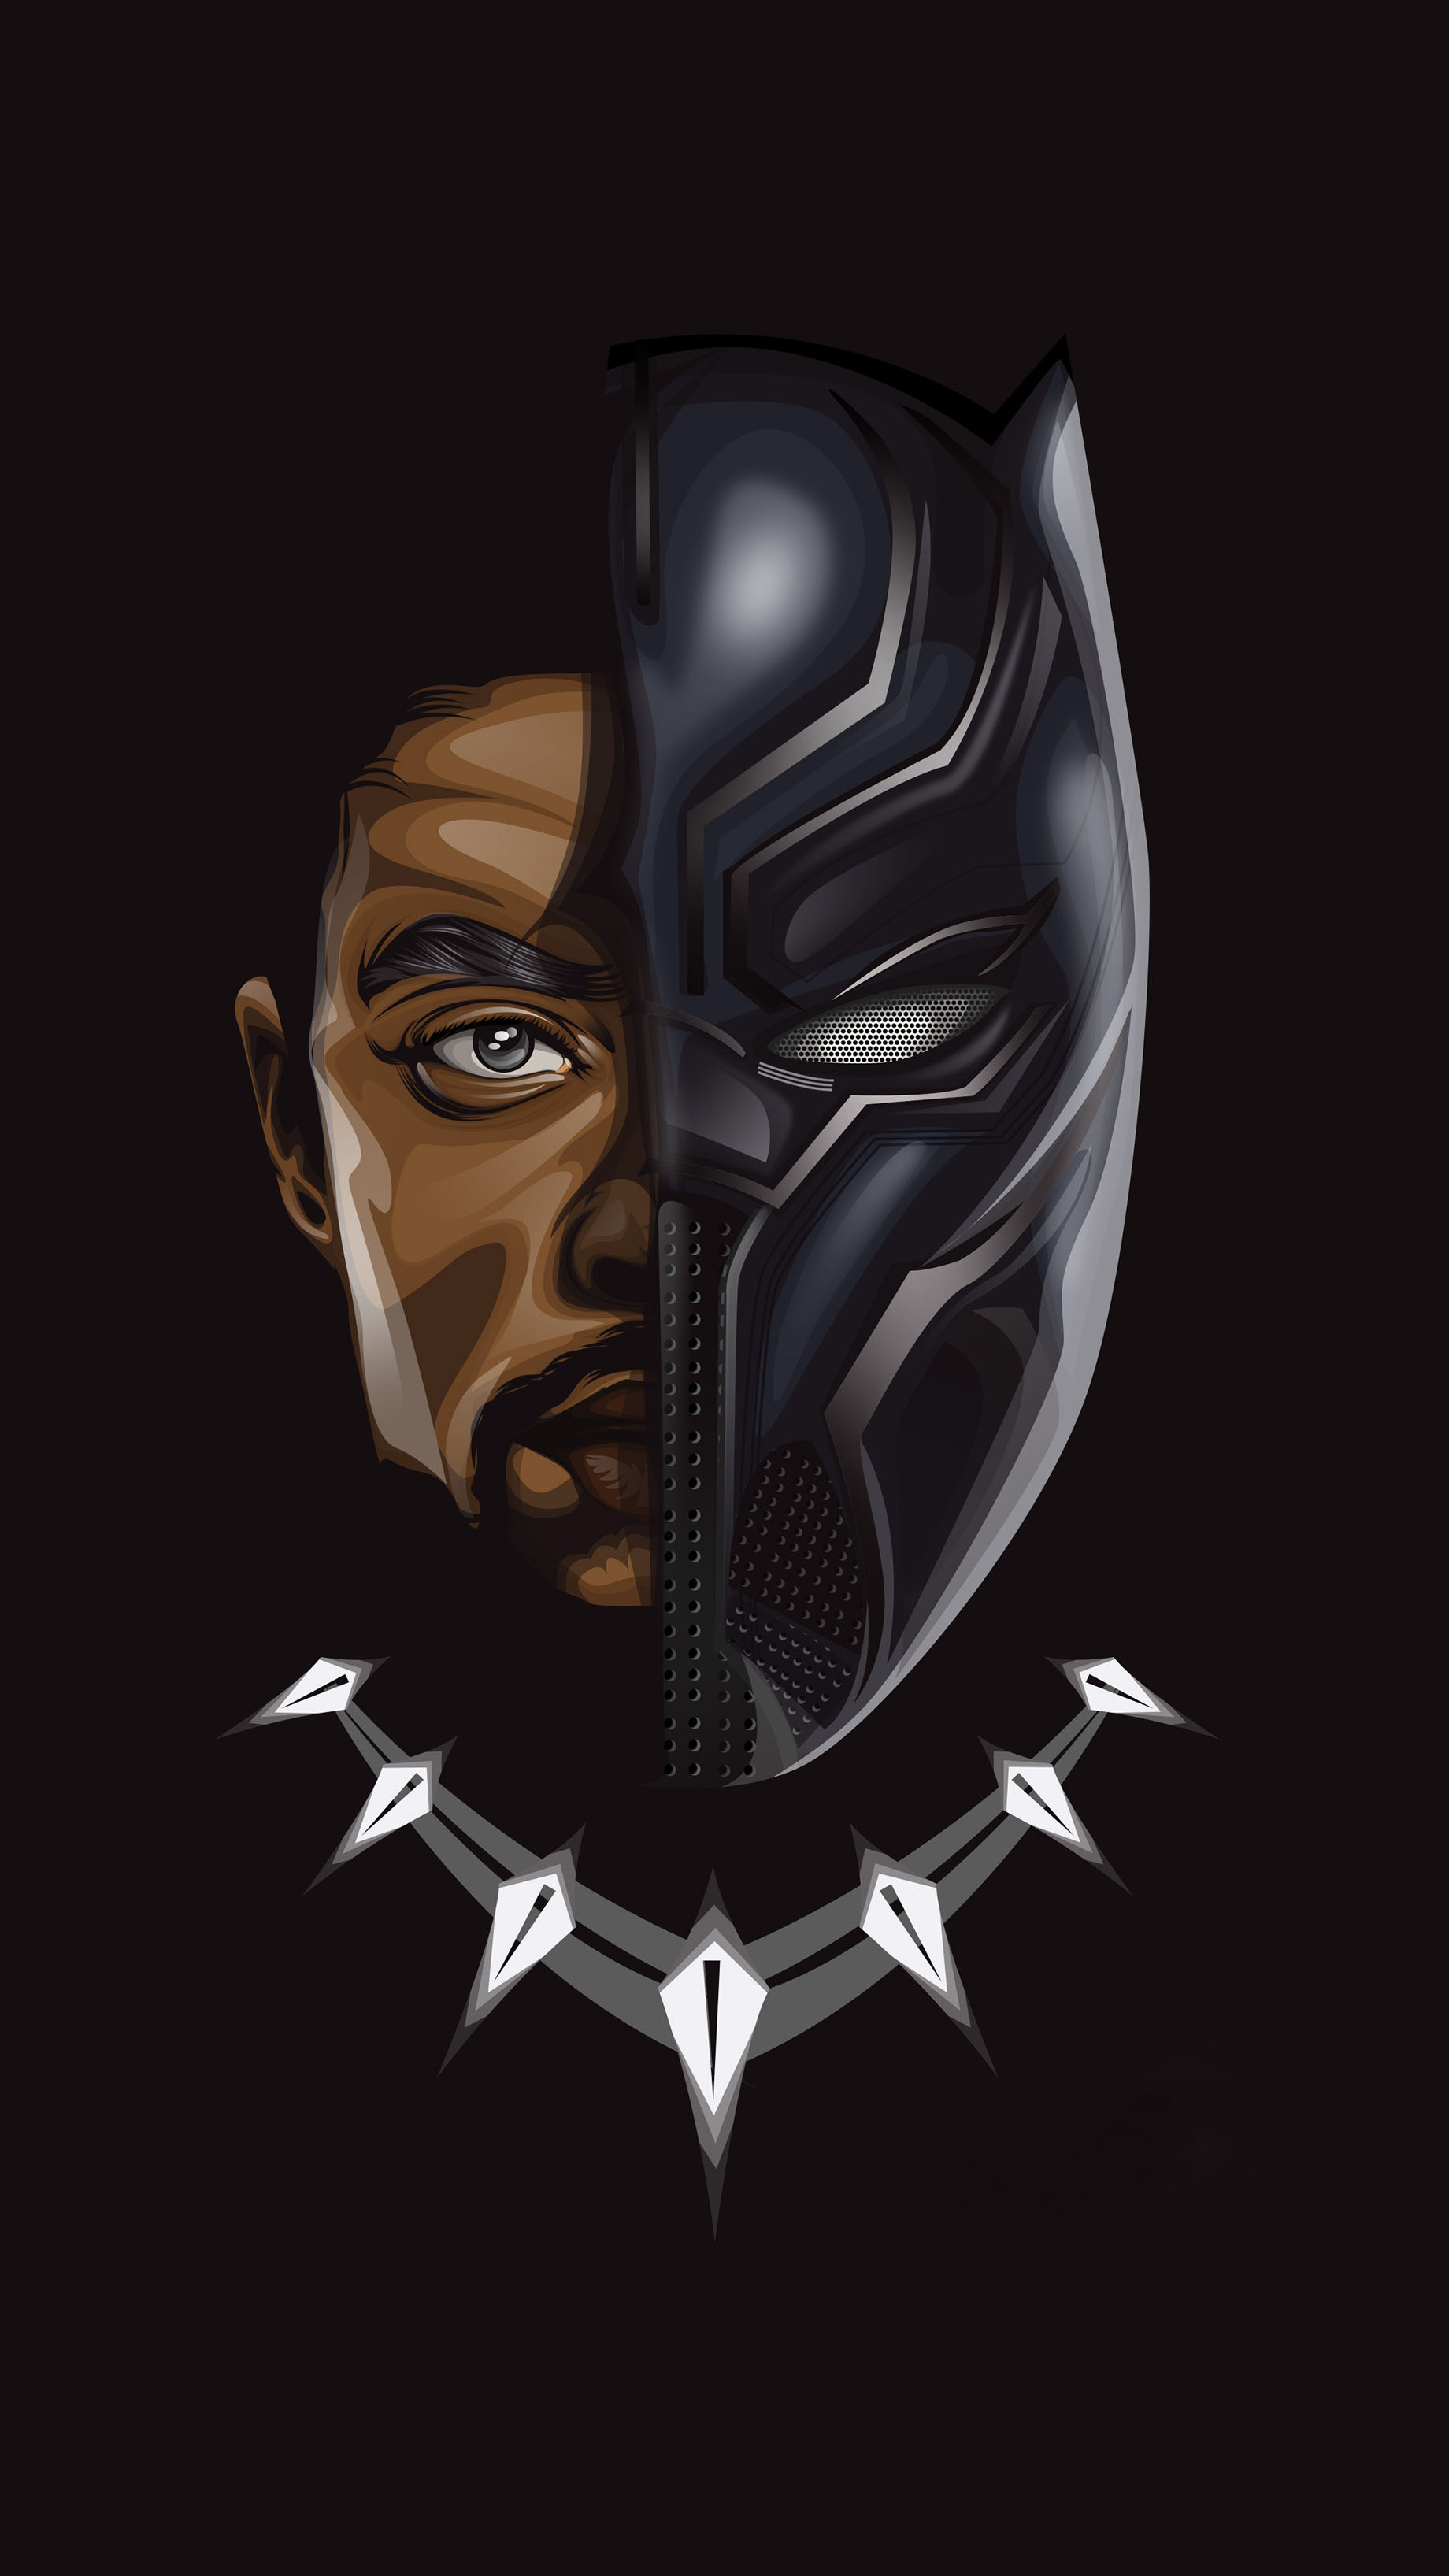 15 Black Panther Marvel Wallpapers 4k iPhone Android and Desktop  The  RamenSwag